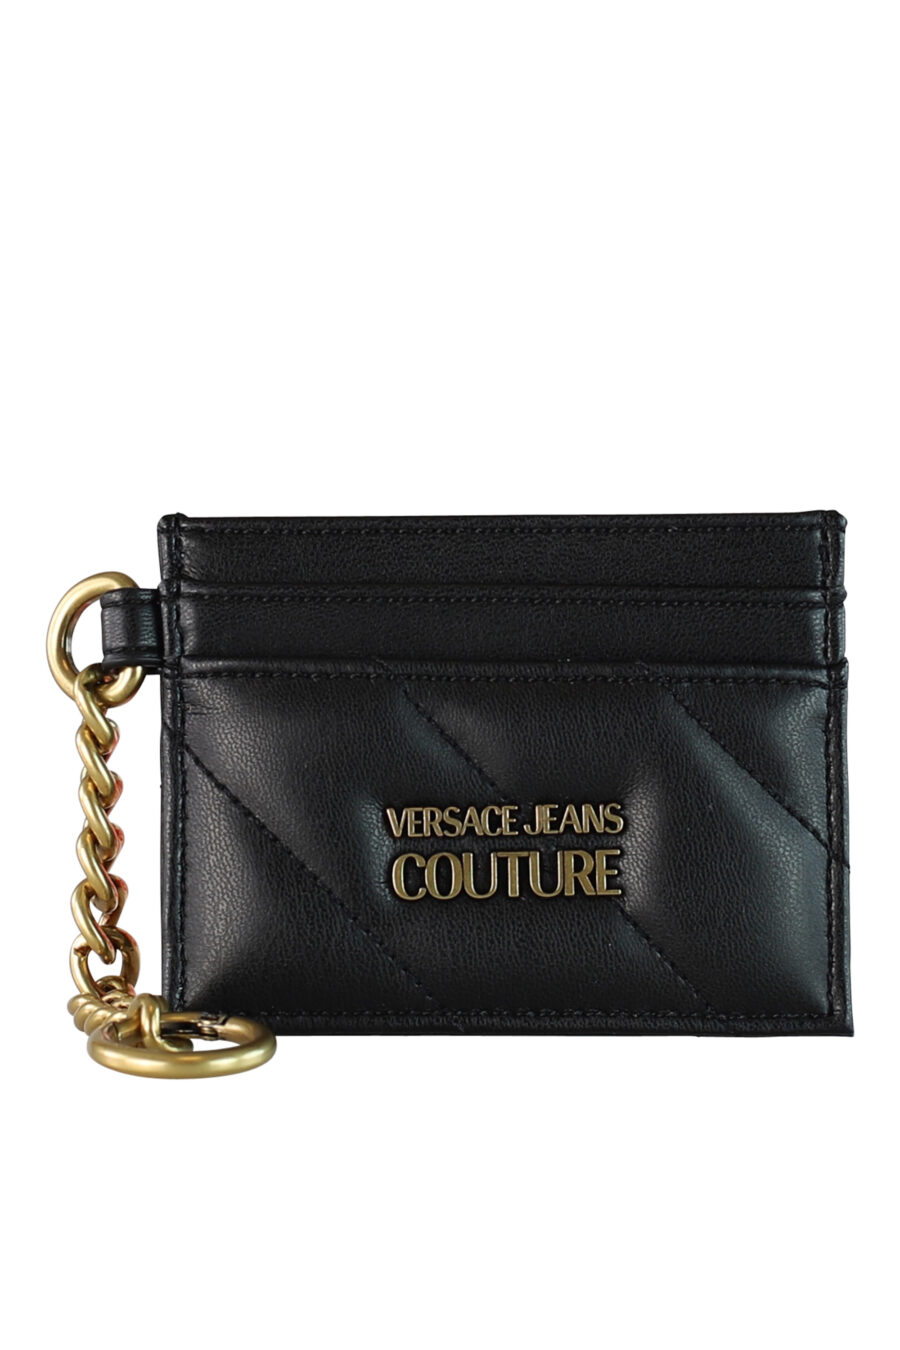 Black card holder with chain and gold logo - IMG 0493